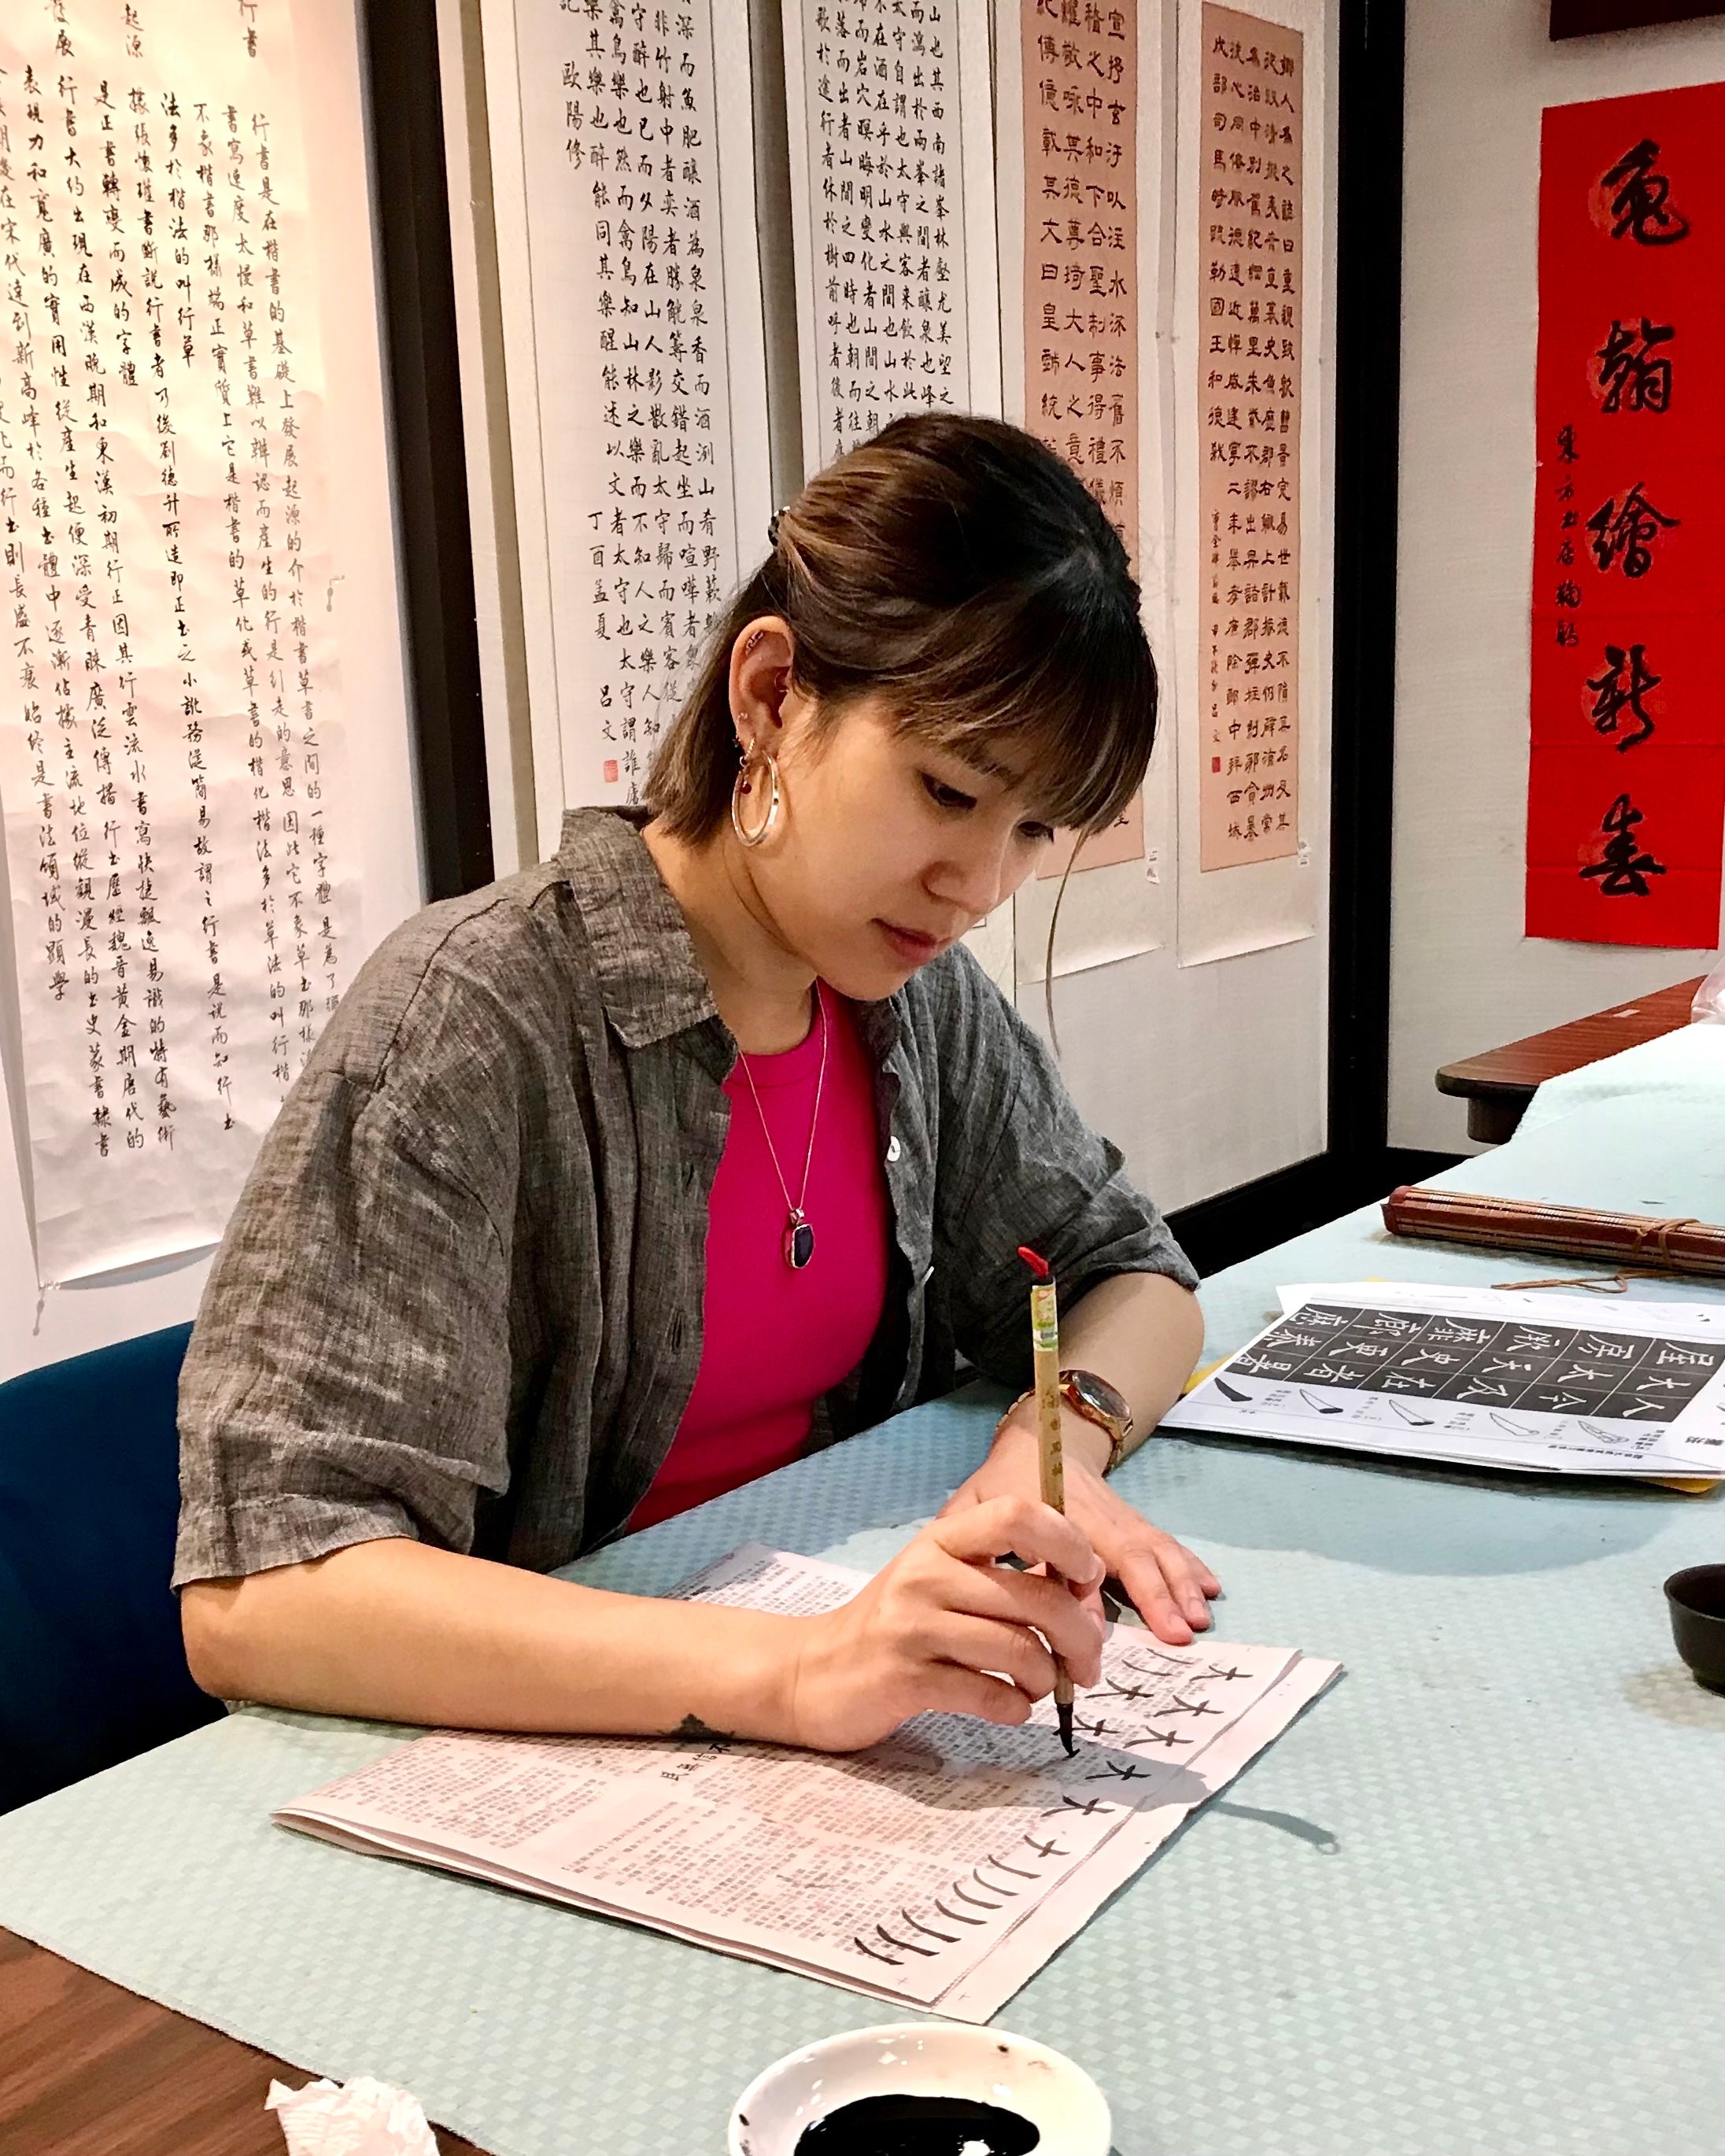 Bonnie practicing Chinese brush calligraphy